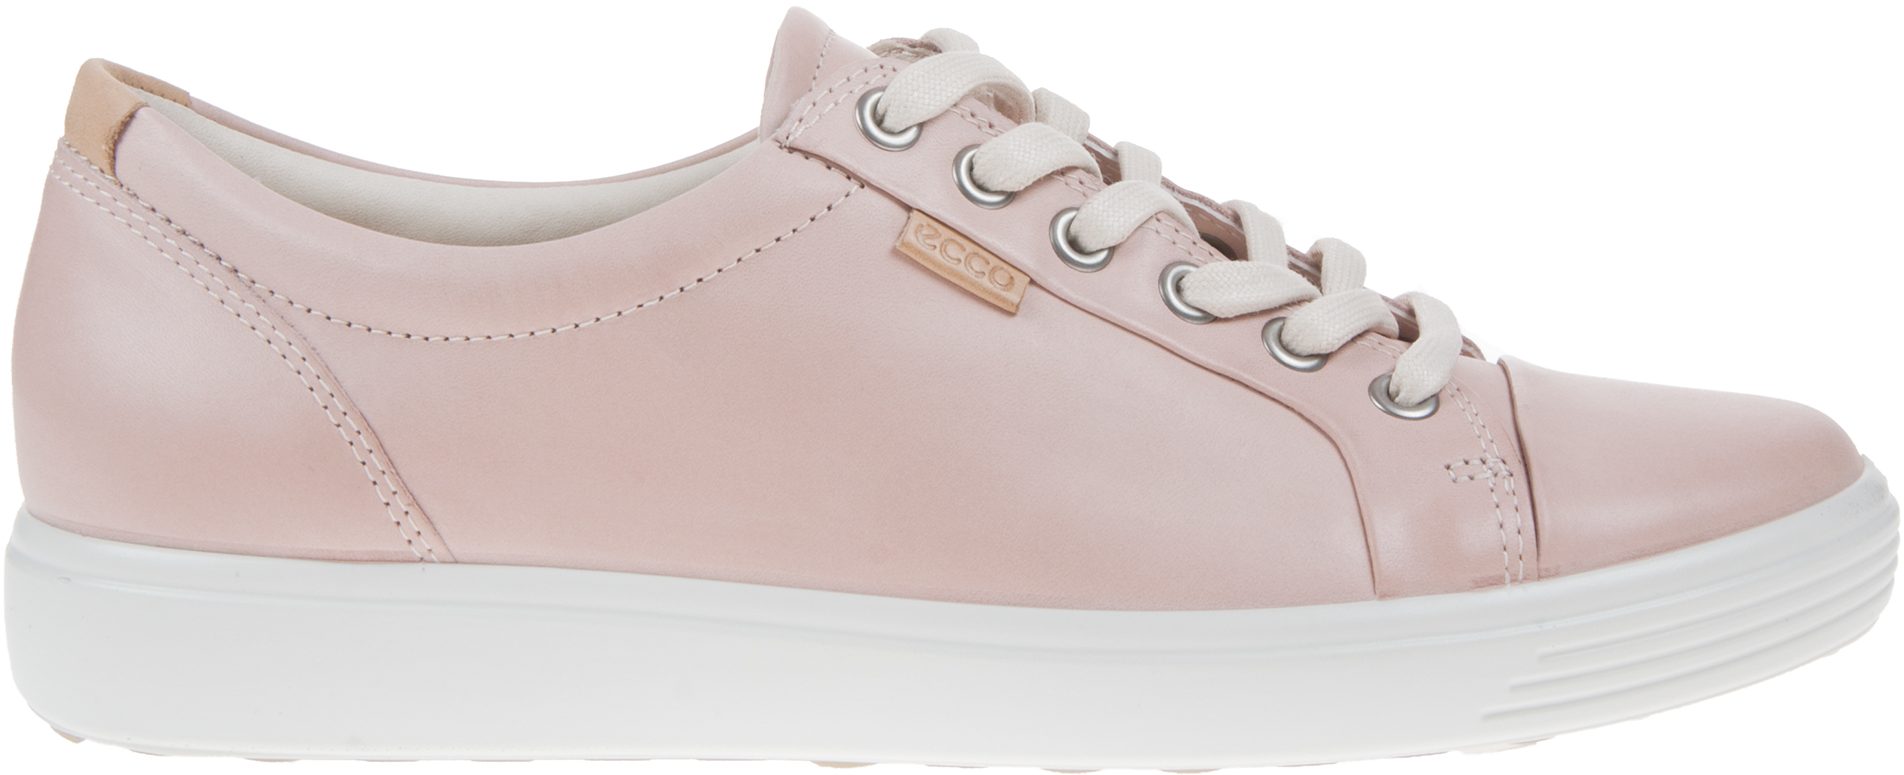 Ecco Soft 7 Ladies Rose Dust 430003 02118 - Everyday Shoes - Humphries ...